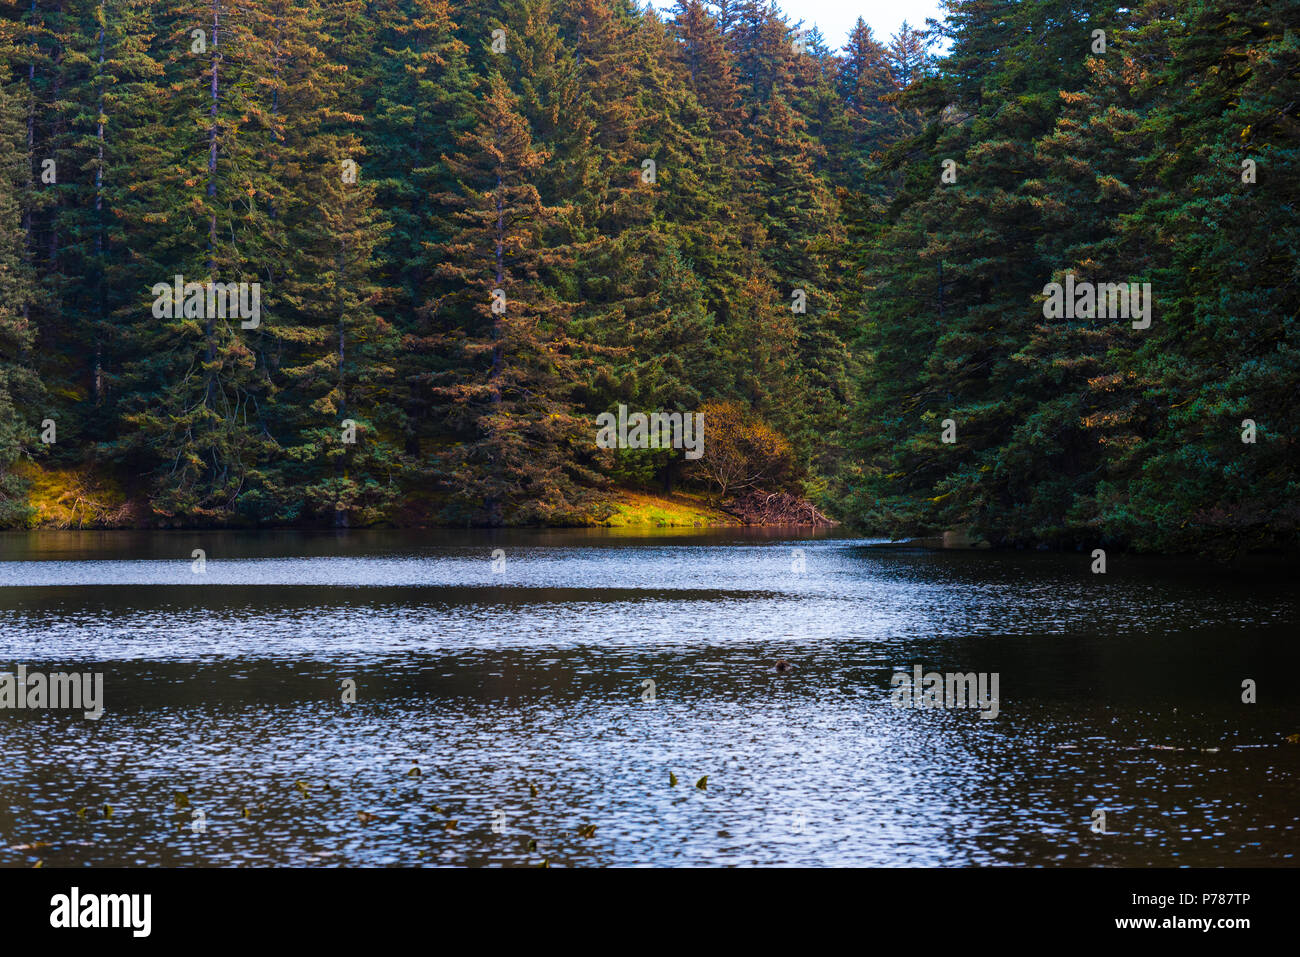 A lake in the Alaskan forest surrounded by trees turning colors Stock Photo